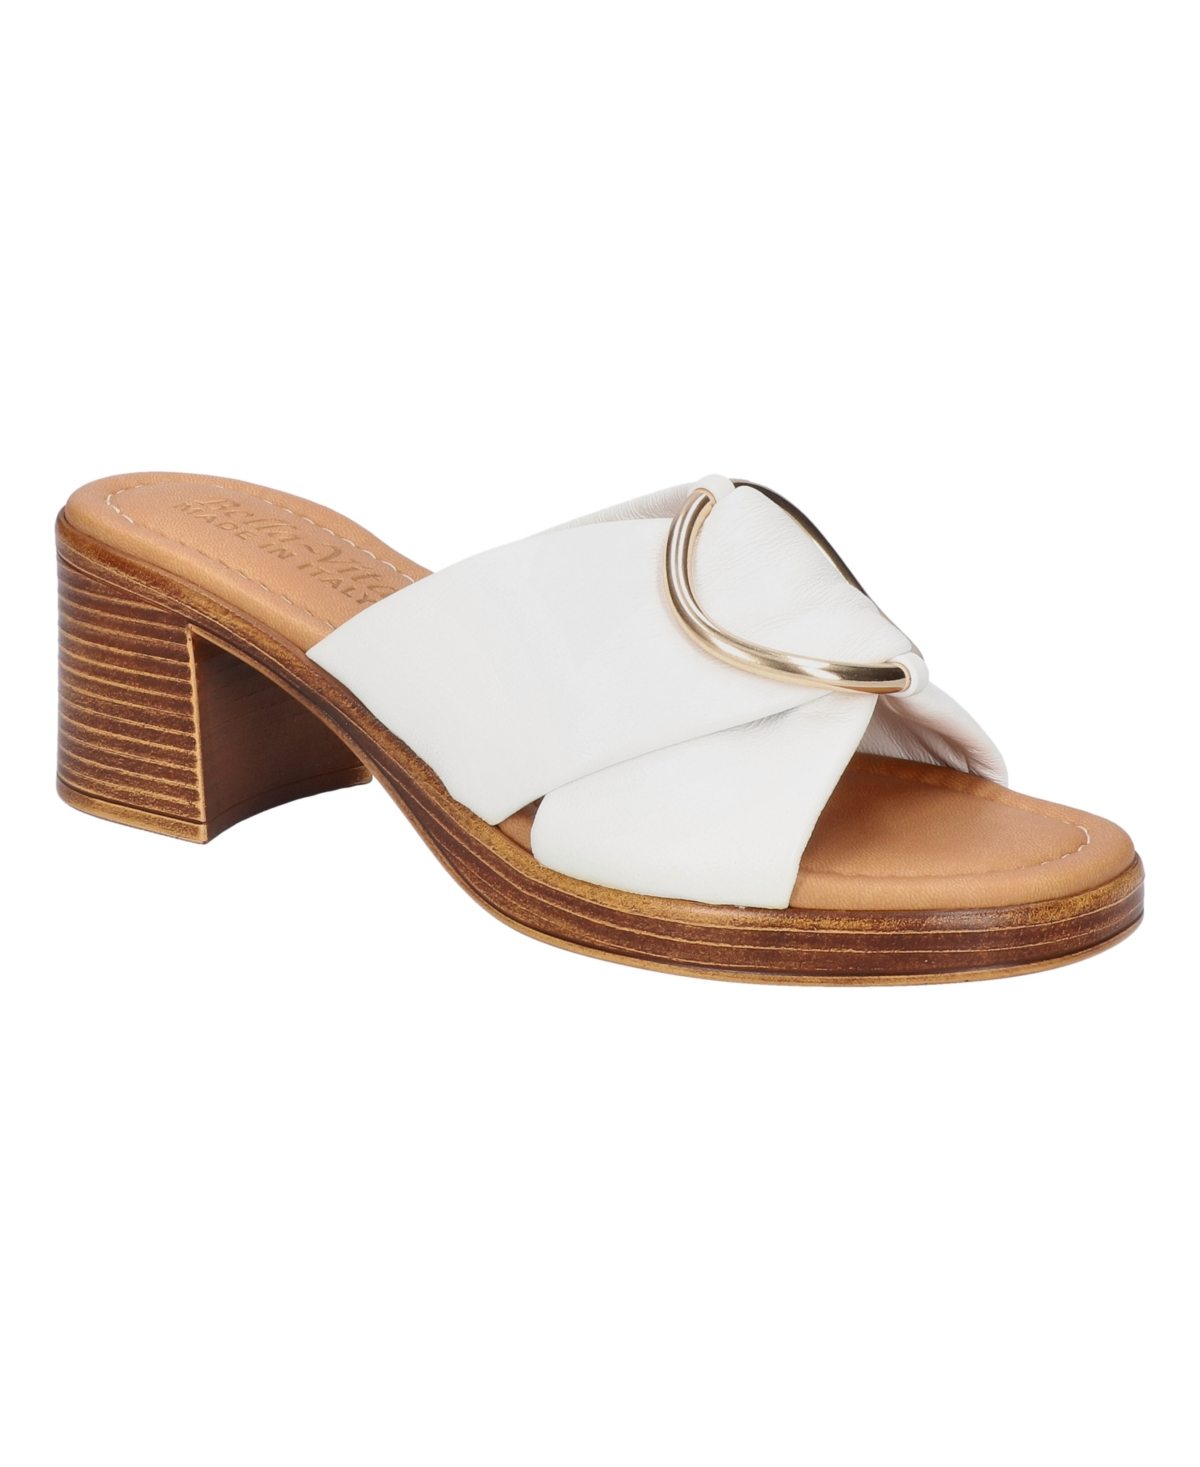 Women's Chi-Italy Block Heel Sandals - Whiskey Leather